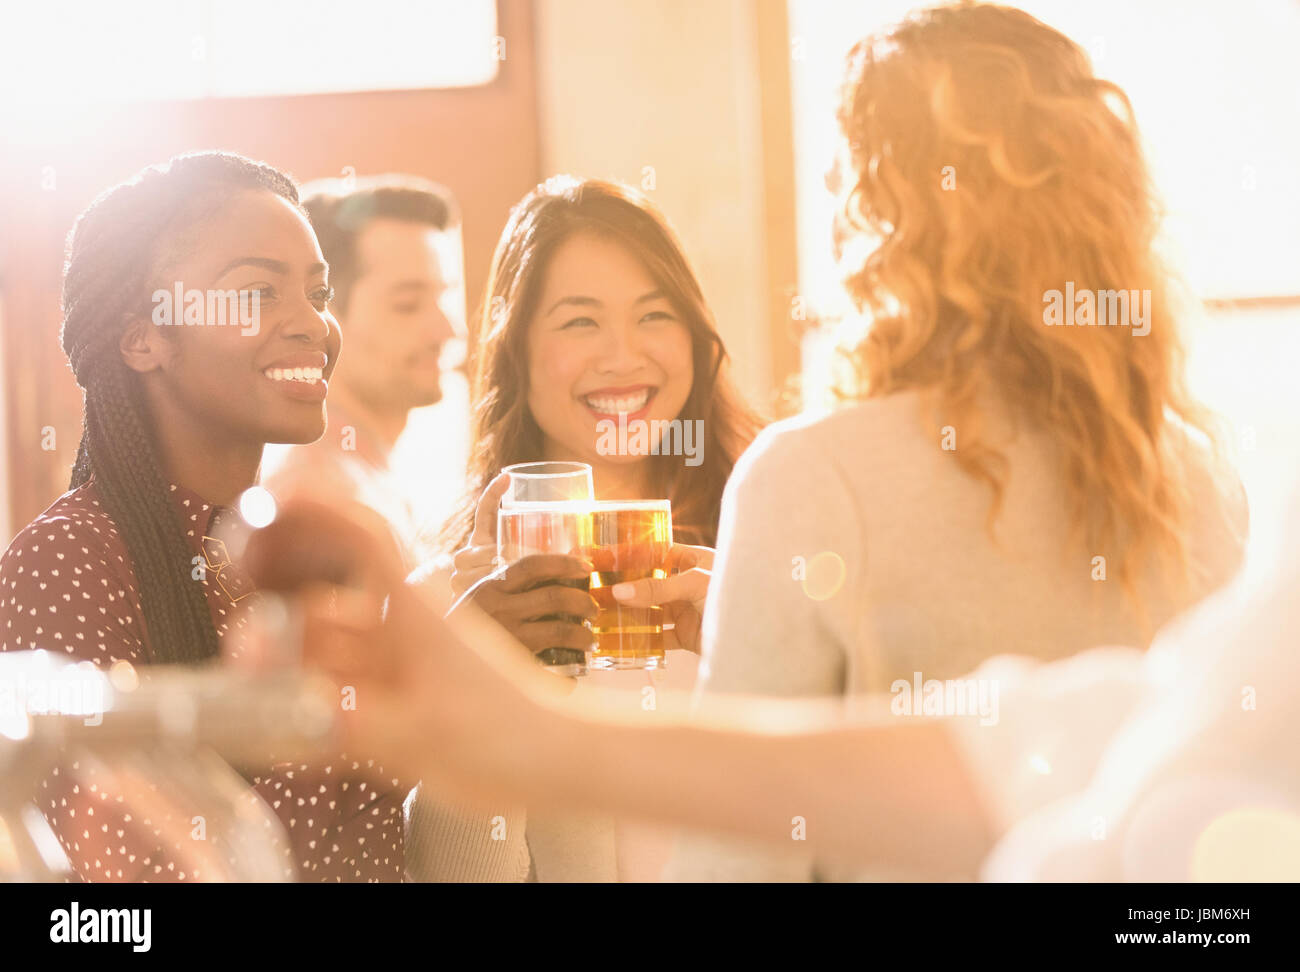 Smiling women friends toasting beer glasses in sunny bar Stock Photo